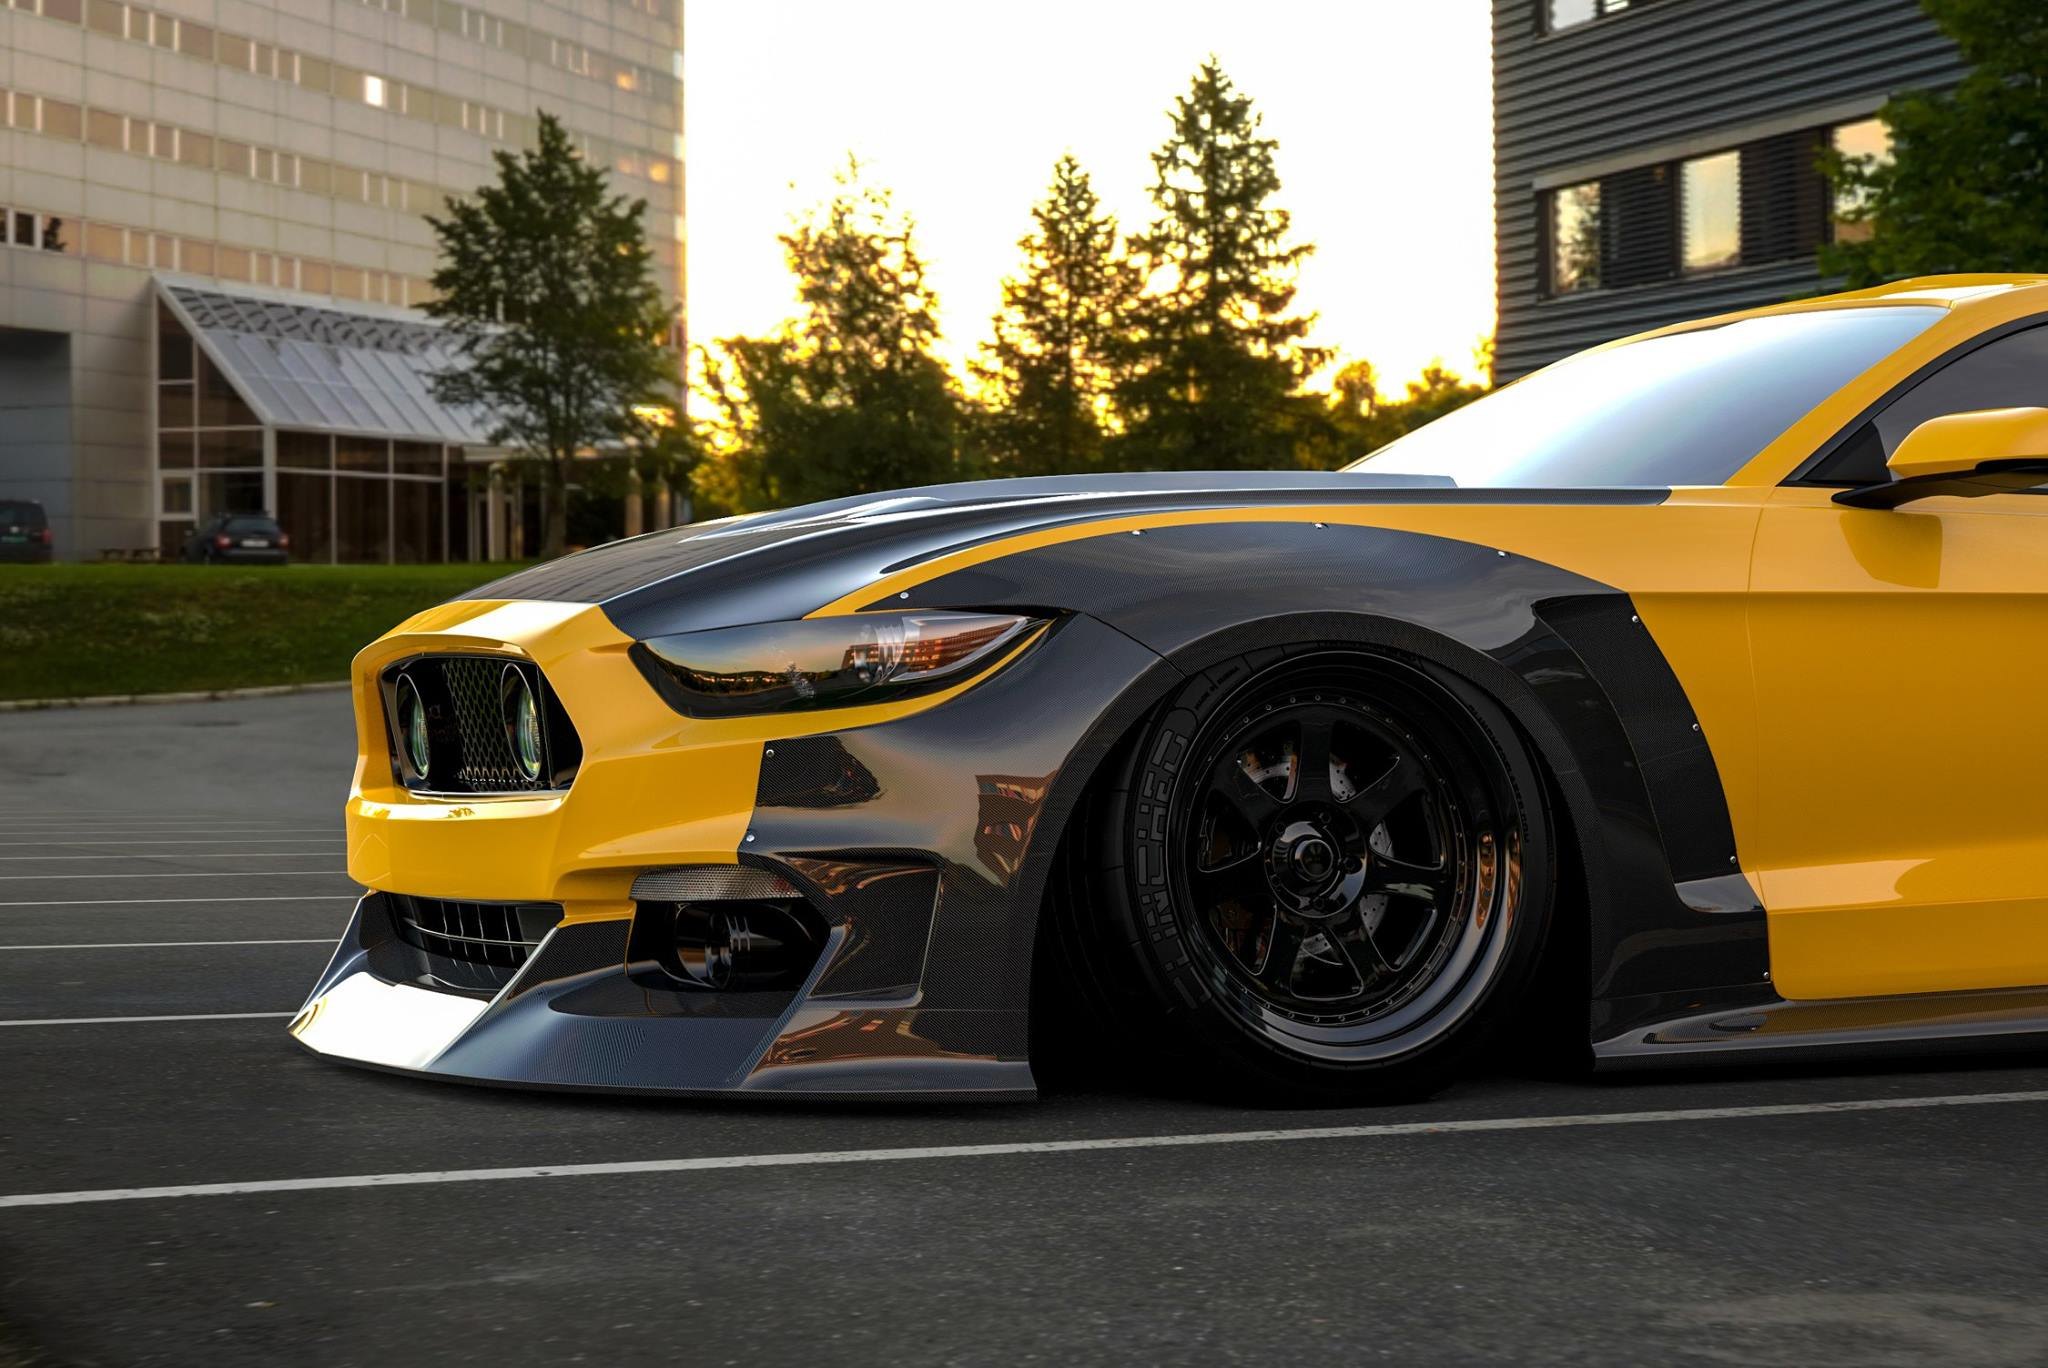 Carbon Fiber Front Bumper on Yellow Ford Mustang - Photo by Clinched